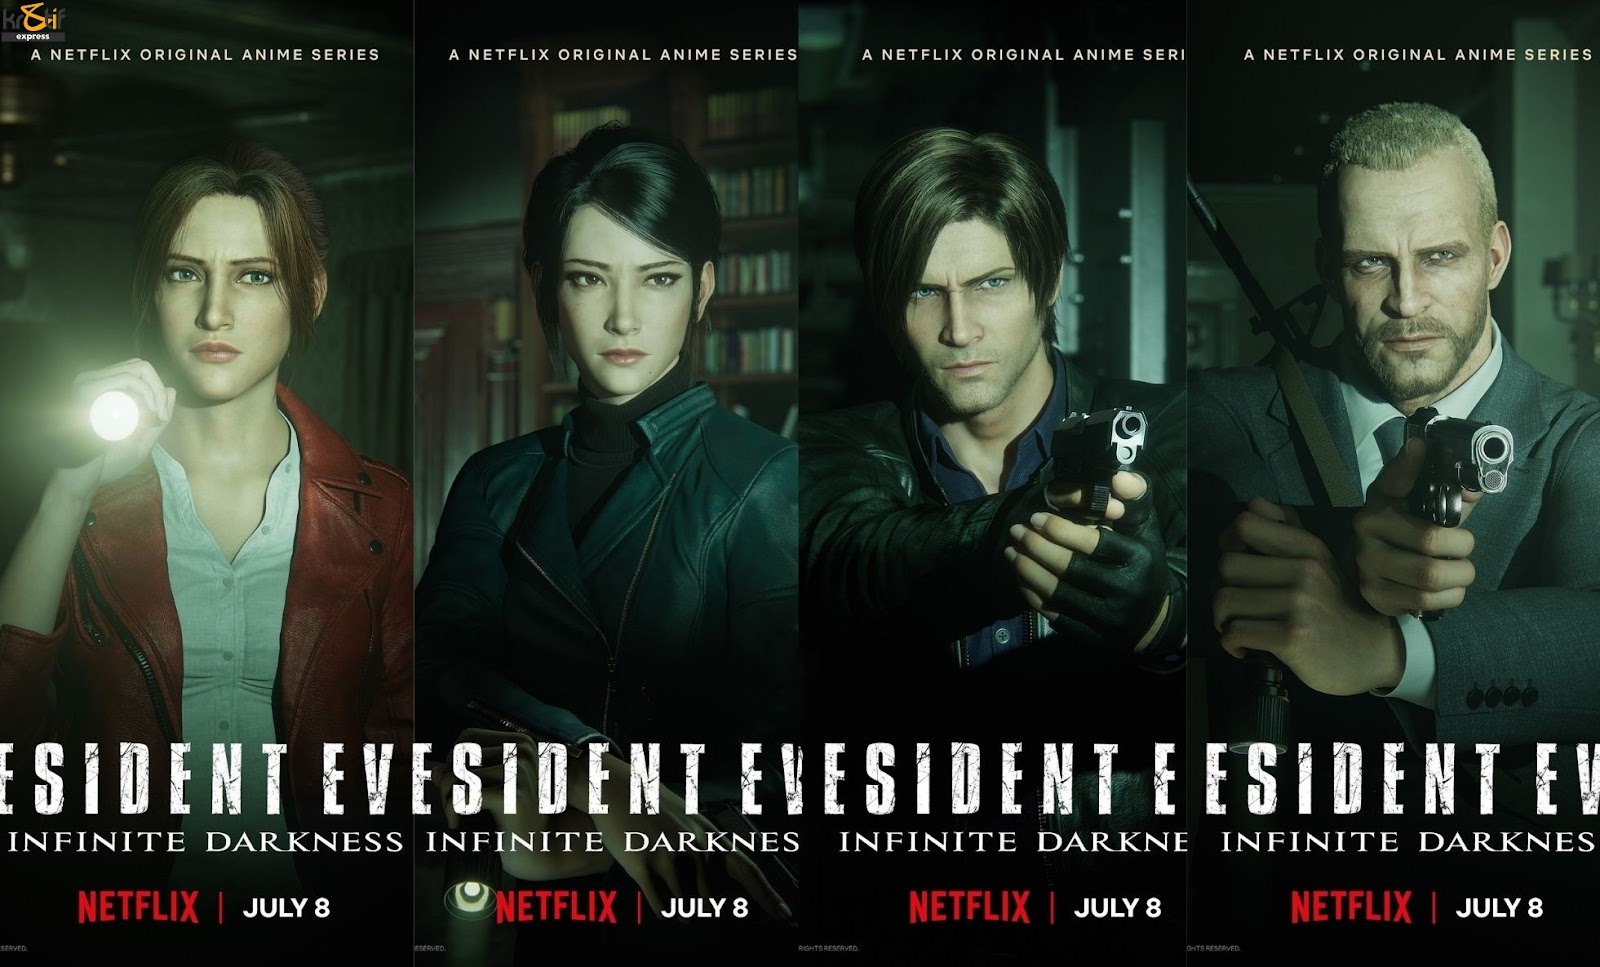 HIGHLY ANTICIPATED ANIME SERIES - RESIDENT EVIL: INFINITE DARKNESS  OFFICIALLY AIRS ON NETFLIX WITH NEW CHARACTERS - Kr8tif Express